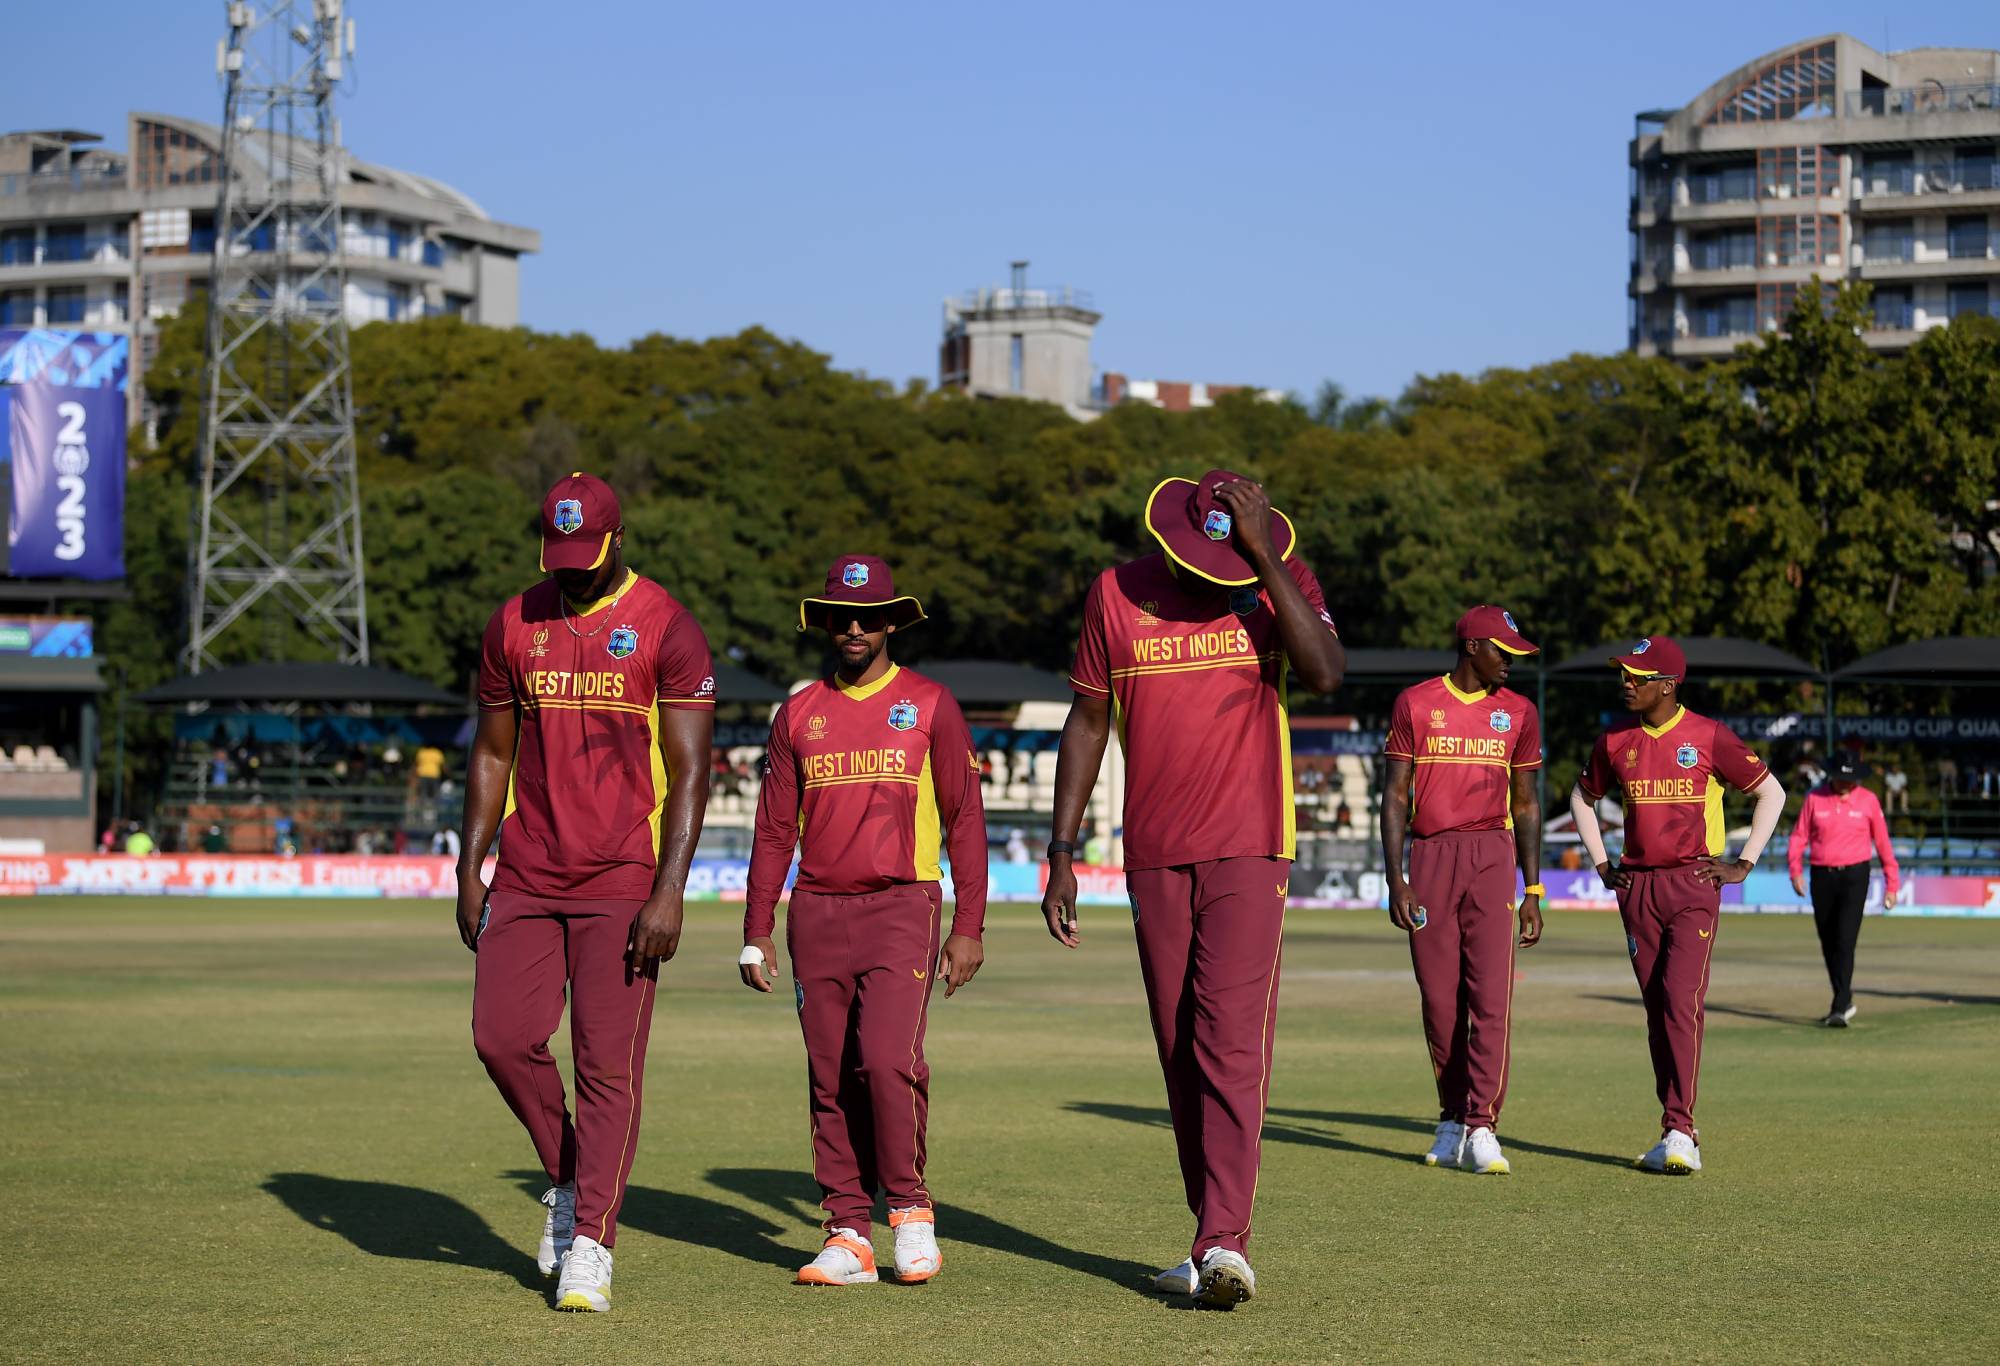 HARARE, ZIMBABWE - JULY 01: Jason Holder of West Indies (R) reacts as they make their way off following the ICC Men's Cricket World Cup Qualifier Zimbabwe 2023 Super 6 match between Scotland and West Indies at Harare Sports Club on July 01, 2023 in Harare, Zimbabwe. (Photo by Alex Davidson-ICC/ICC via Getty Images)